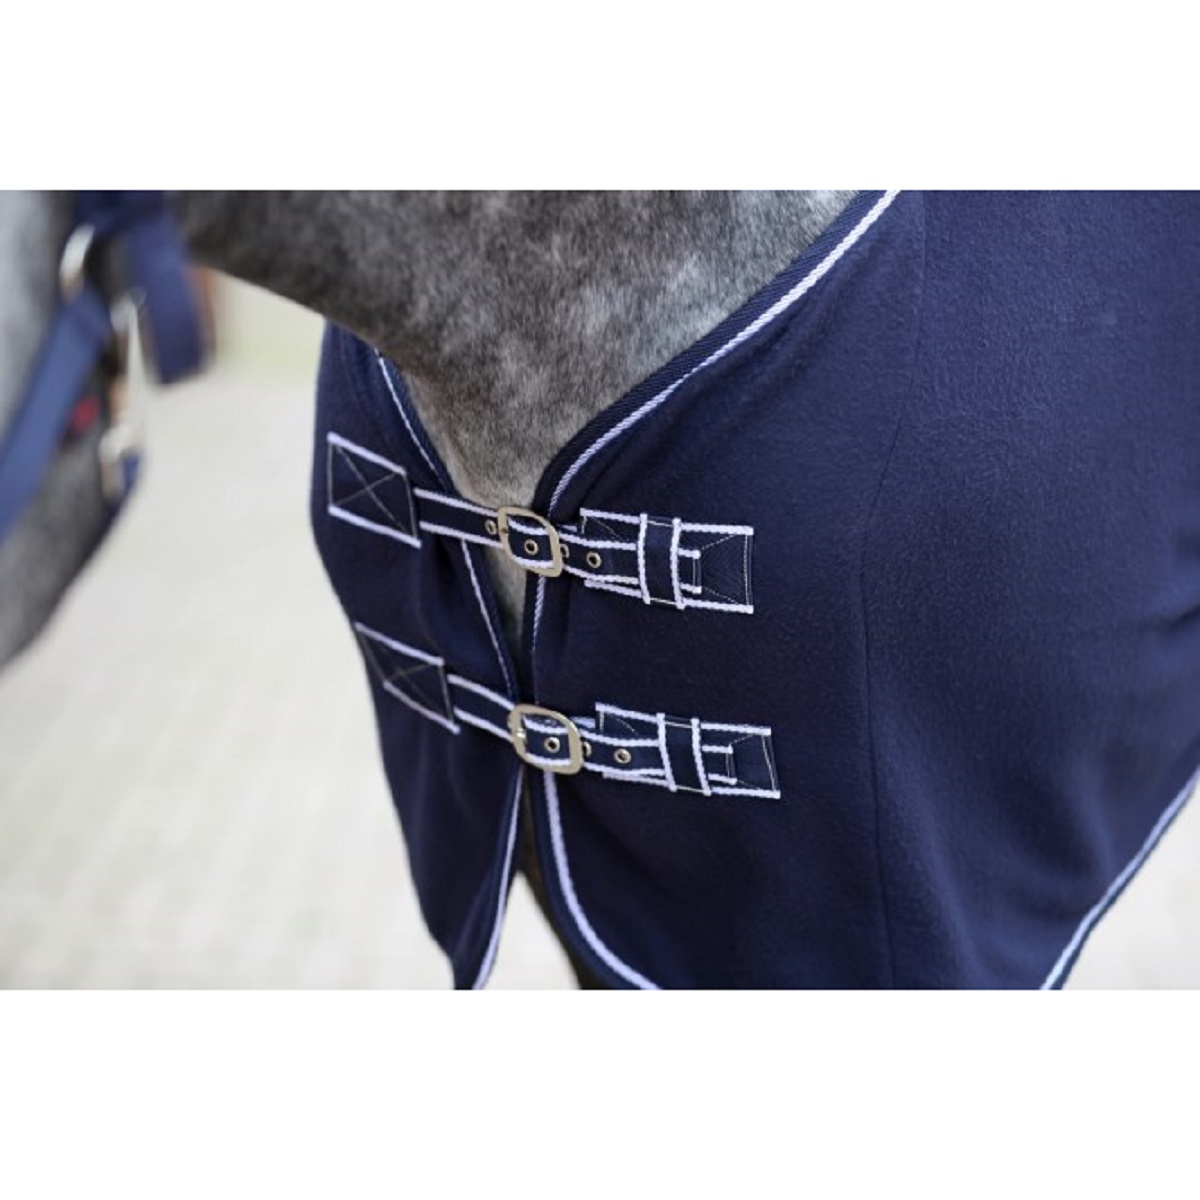 Cooler Rug RugBe Classic navy 155